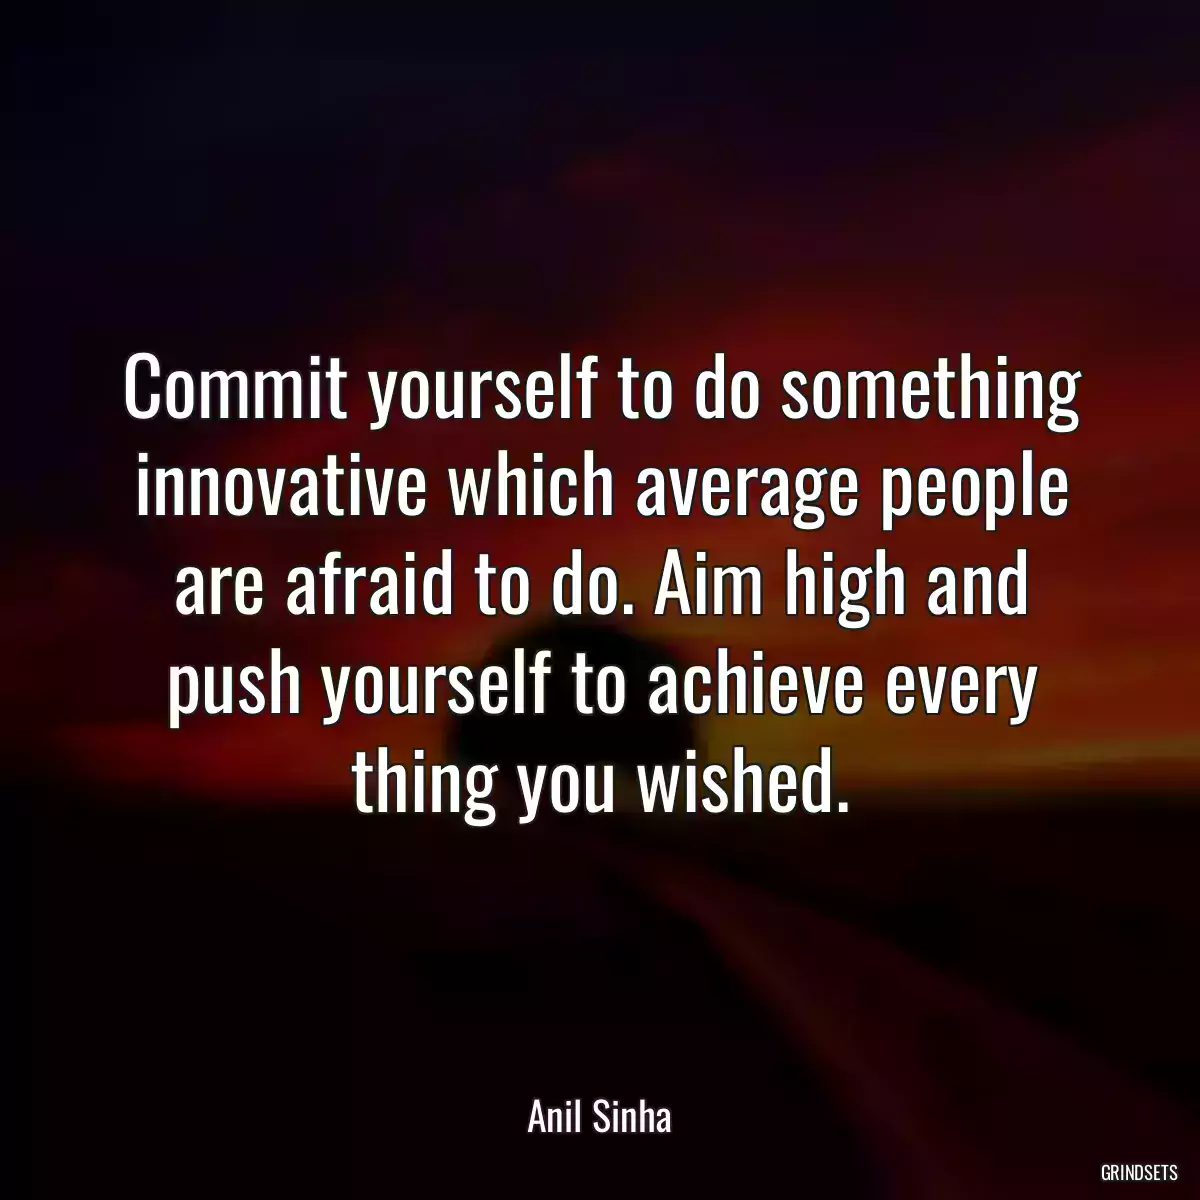 Commit yourself to do something innovative which average people are afraid to do. Aim high and push yourself to achieve every thing you wished.